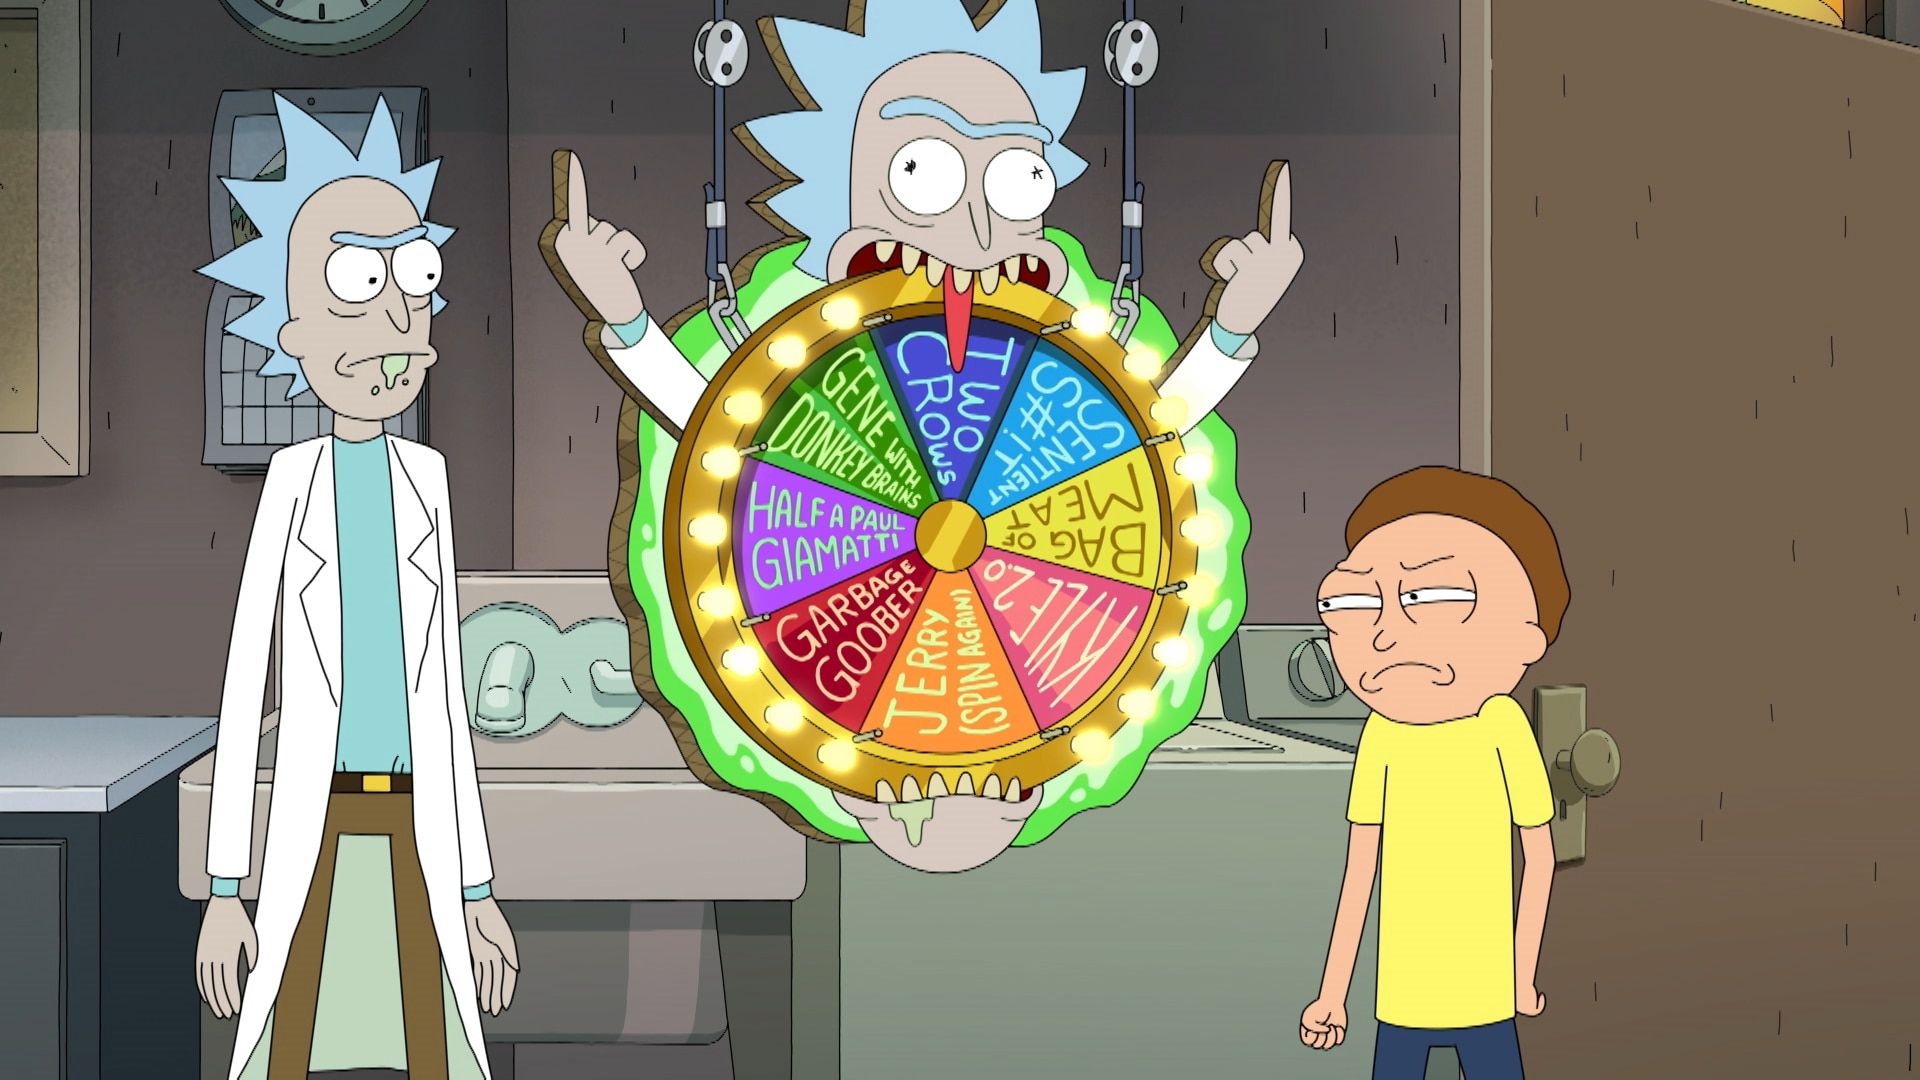 How to watch Rick and Morty Season 6?